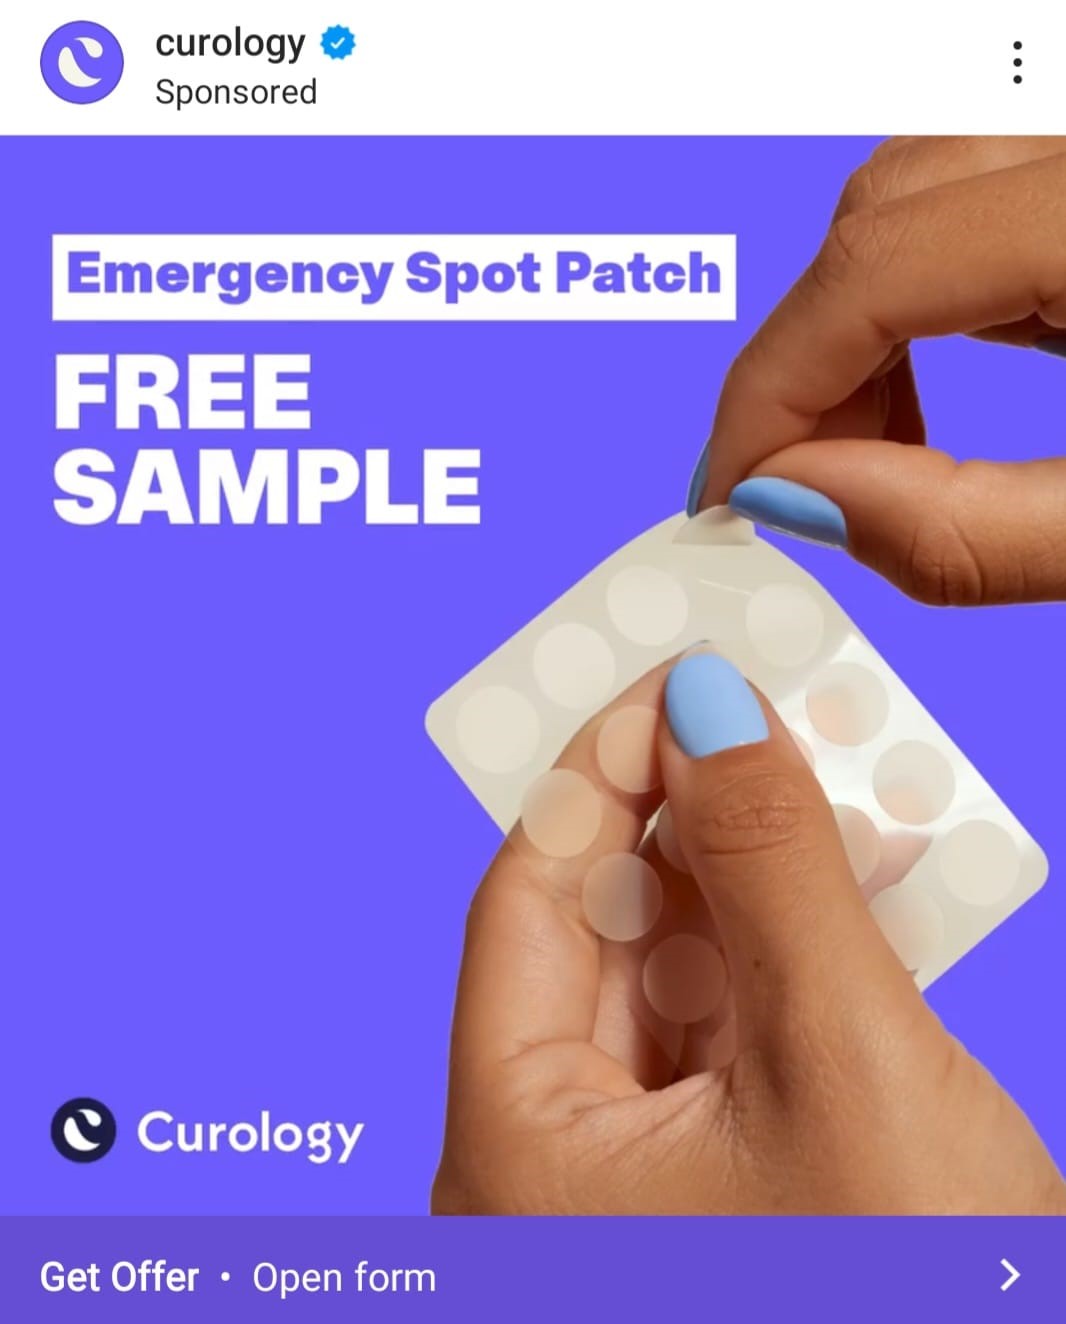 FREE Sample of Curology Emergency Spot Patch